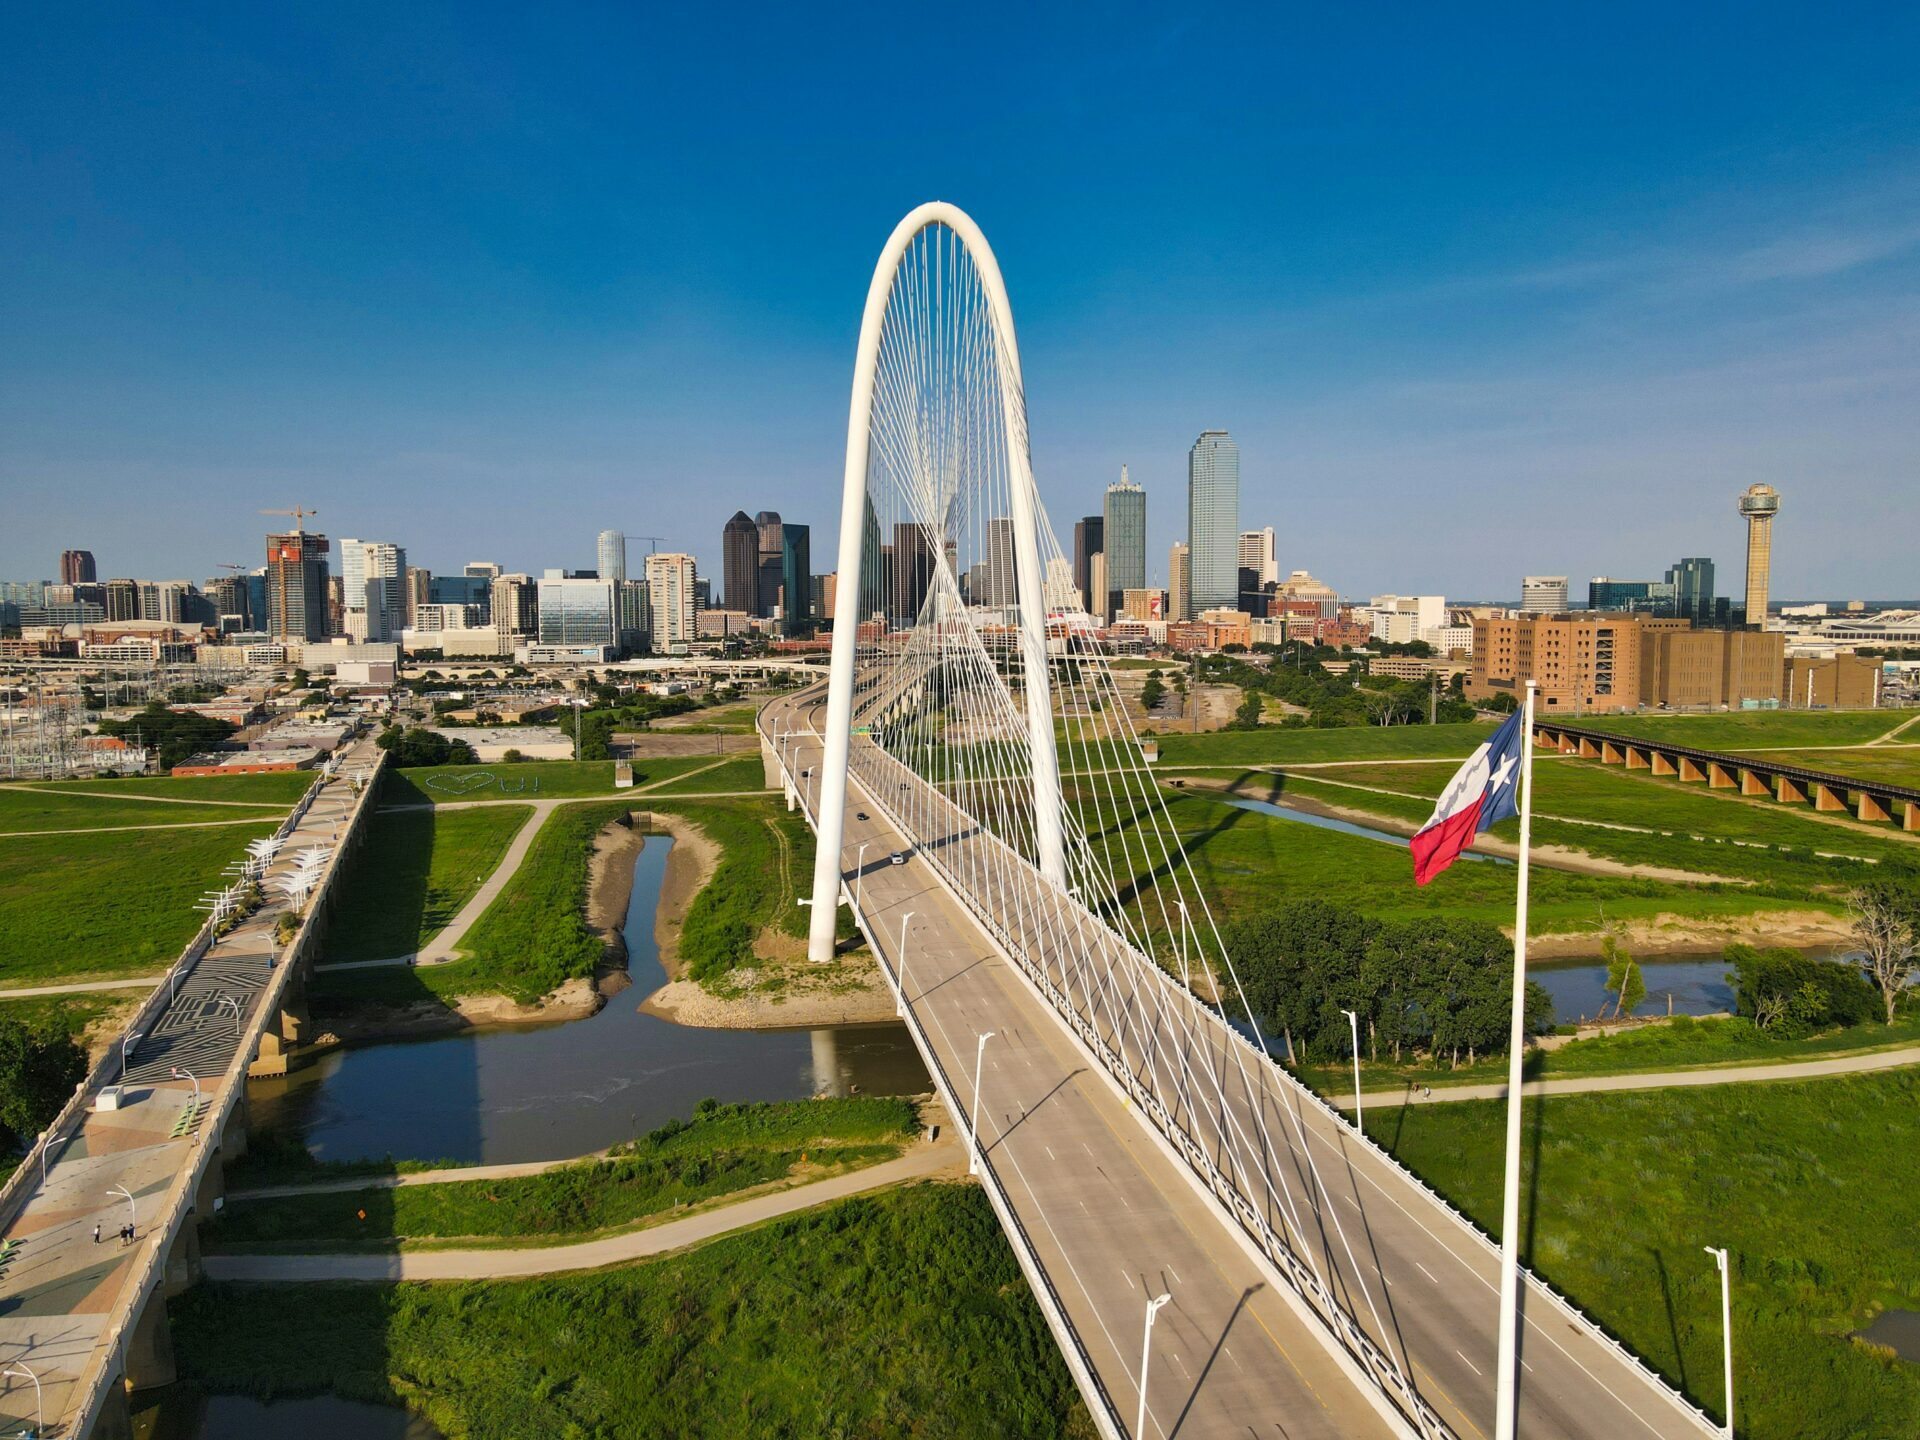 bridge in Dallas Texas with Texas flag in foreground and blue sky